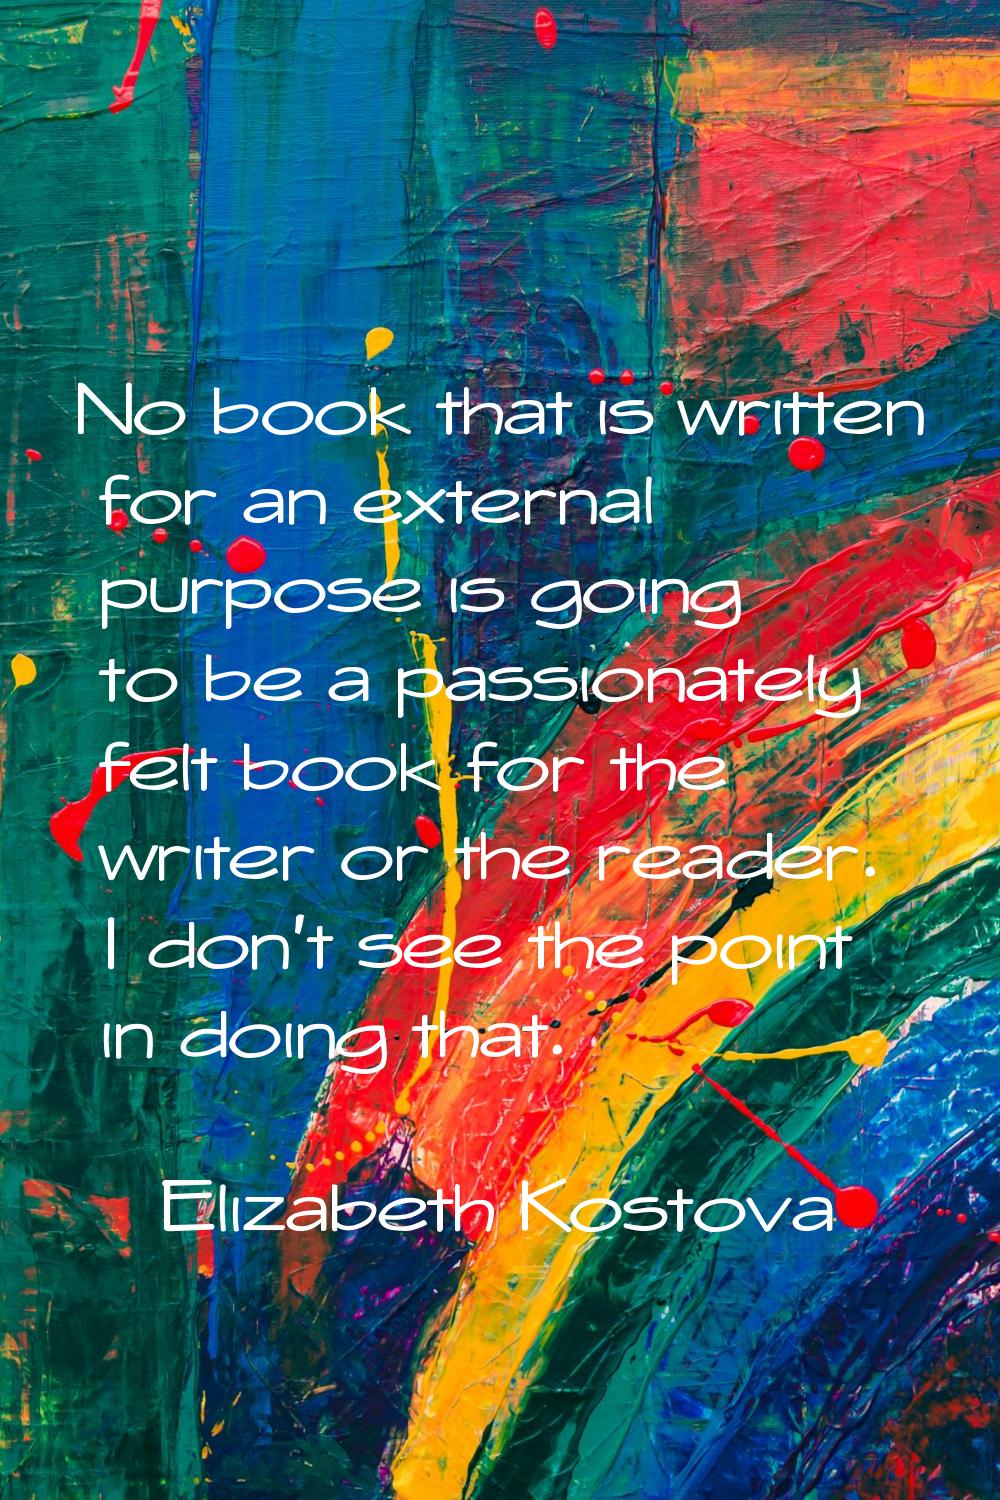 No book that is written for an external purpose is going to be a passionately felt book for the wri